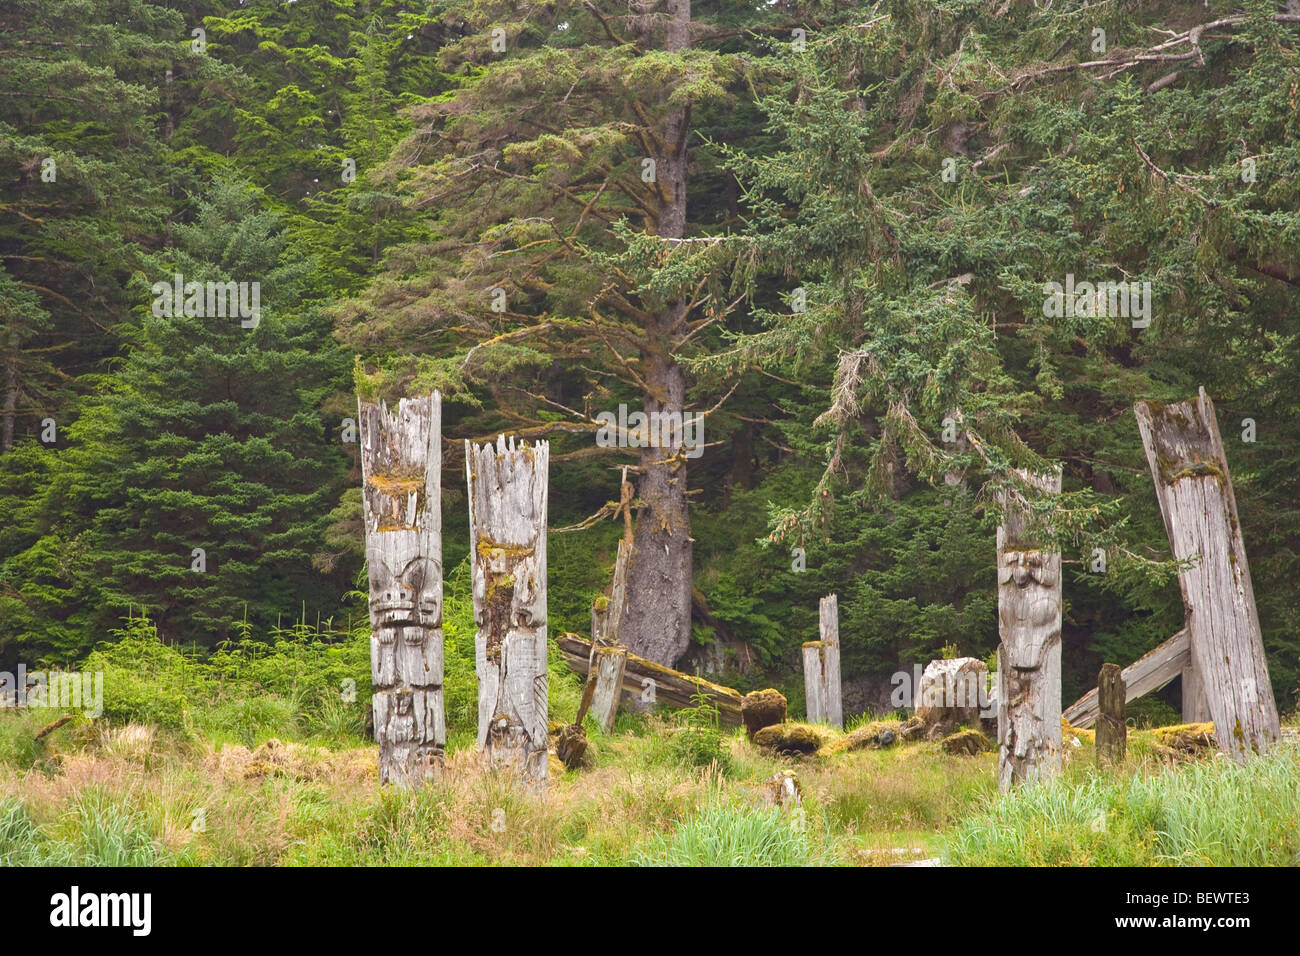 Standing poles at Ninstints, in Gwaii Haanas National Park Reserve, Queen Charlotte Islands of British Columbia, Canada Stock Photo